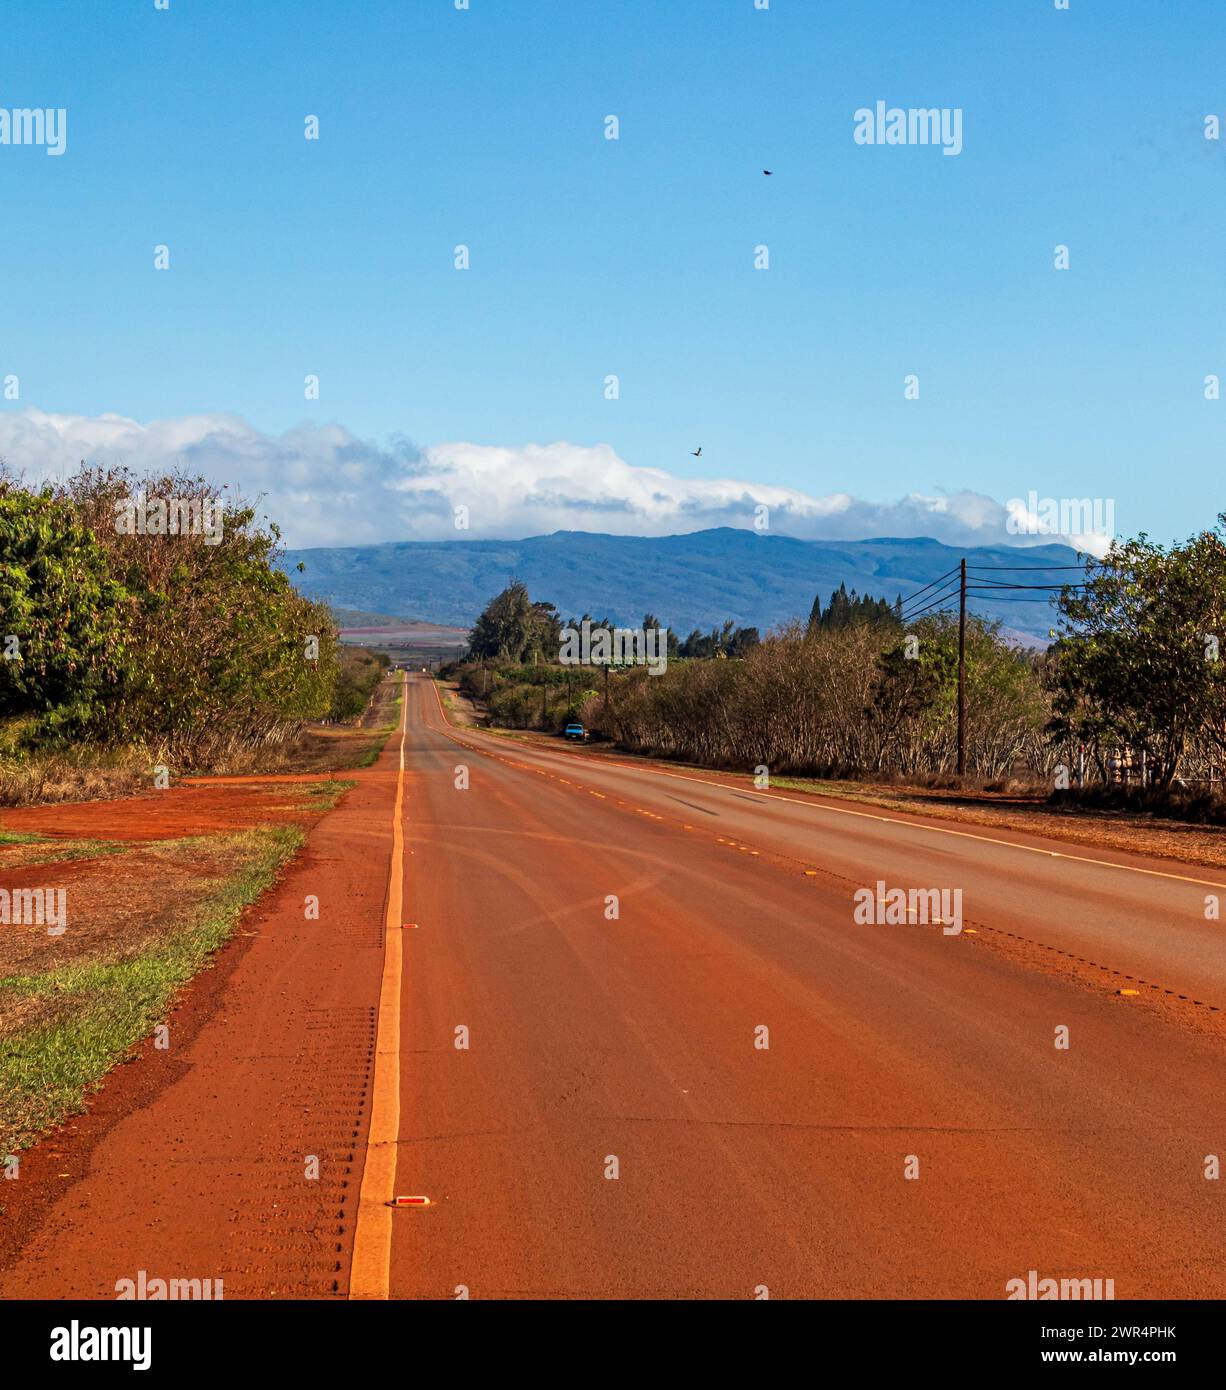 Main road on Molokai, Hawaii.  Red dirt or laterite soil covers the road, resulting from ancient volcanoes. Stock Photo